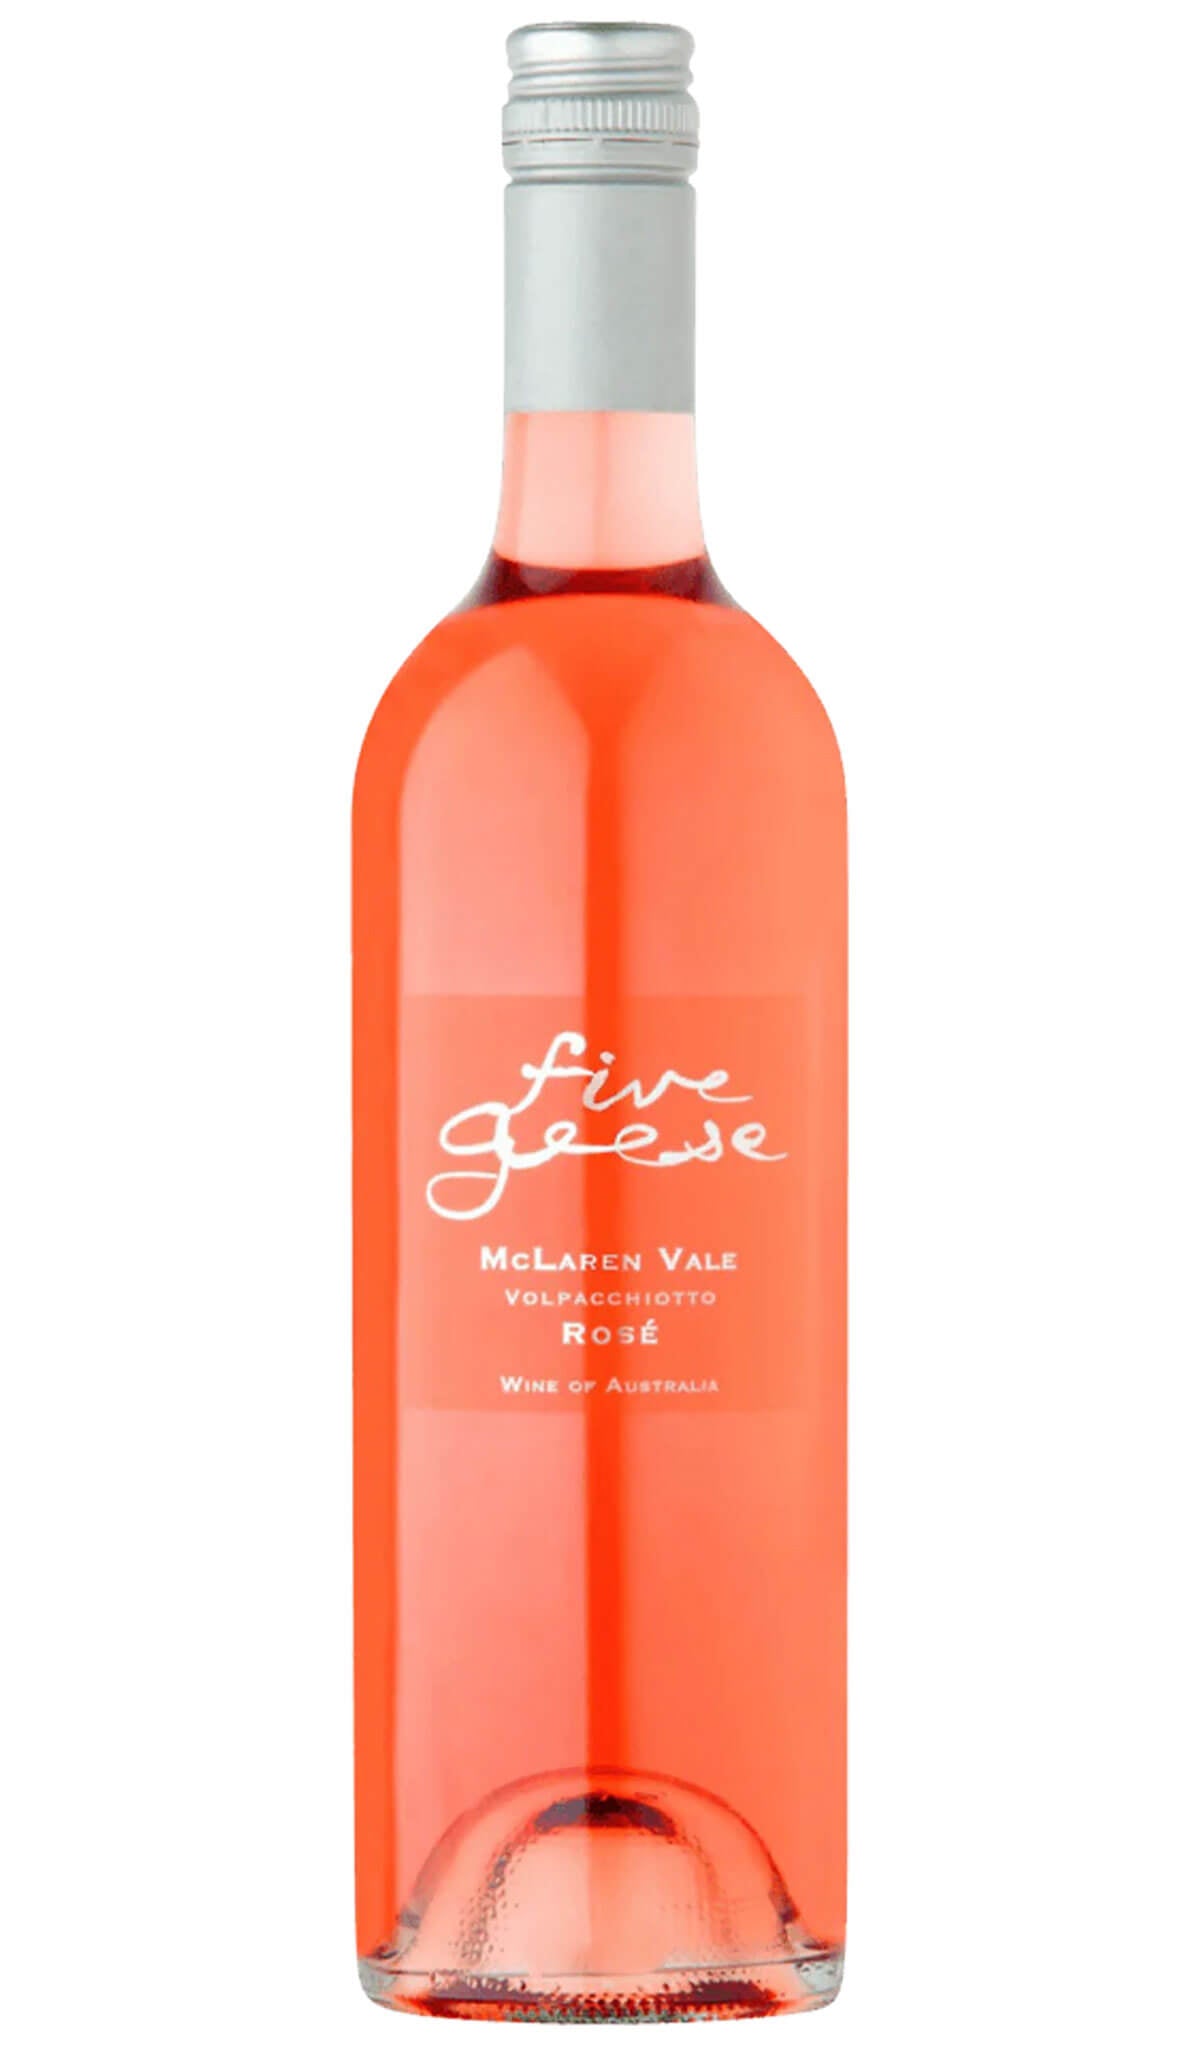 Find out more, explore the range and purchase Five Geese Volpacchiotto Rosé 2017 (McLaren Vale) available online at Wine Sellers Direct - Australia's independent liquor specialists.